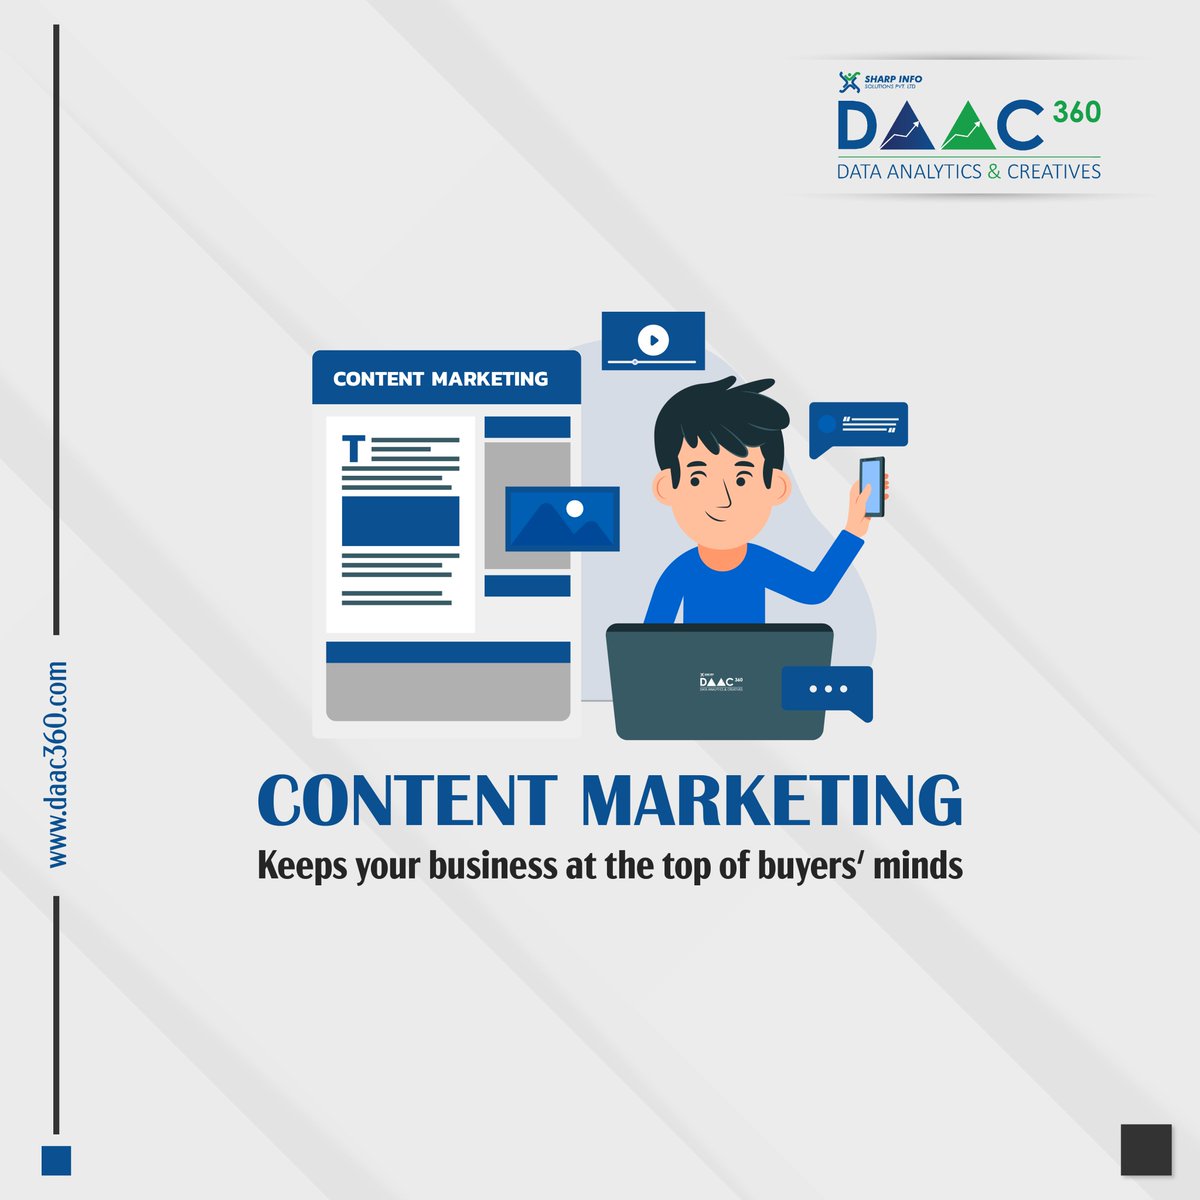 Here is what #contentmarketing does to your business👇
* Attracts new customers
* Engages existing customers
* Retains loyal customers

For effective #contentmarketingservices reach us at daac360.com or contact us at +91 96557 36000 or info@daac360.com to get started!